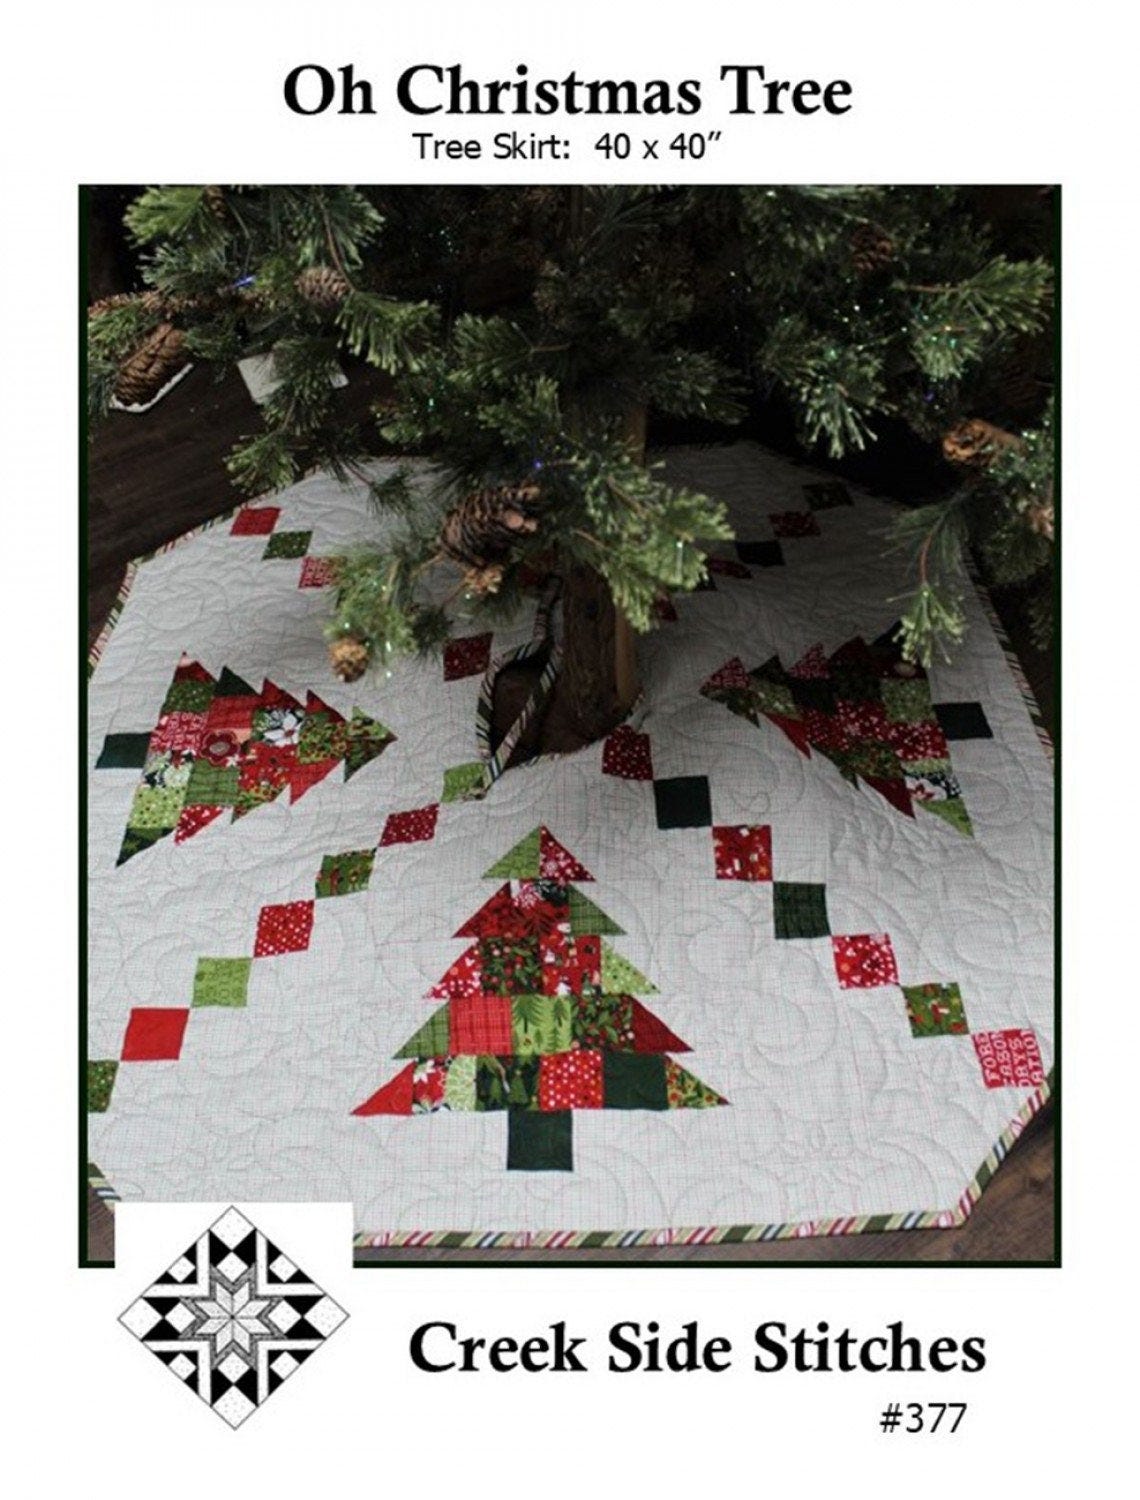 Oh Christmas Tree Tree Skirt Pattern By Creekside Stitches